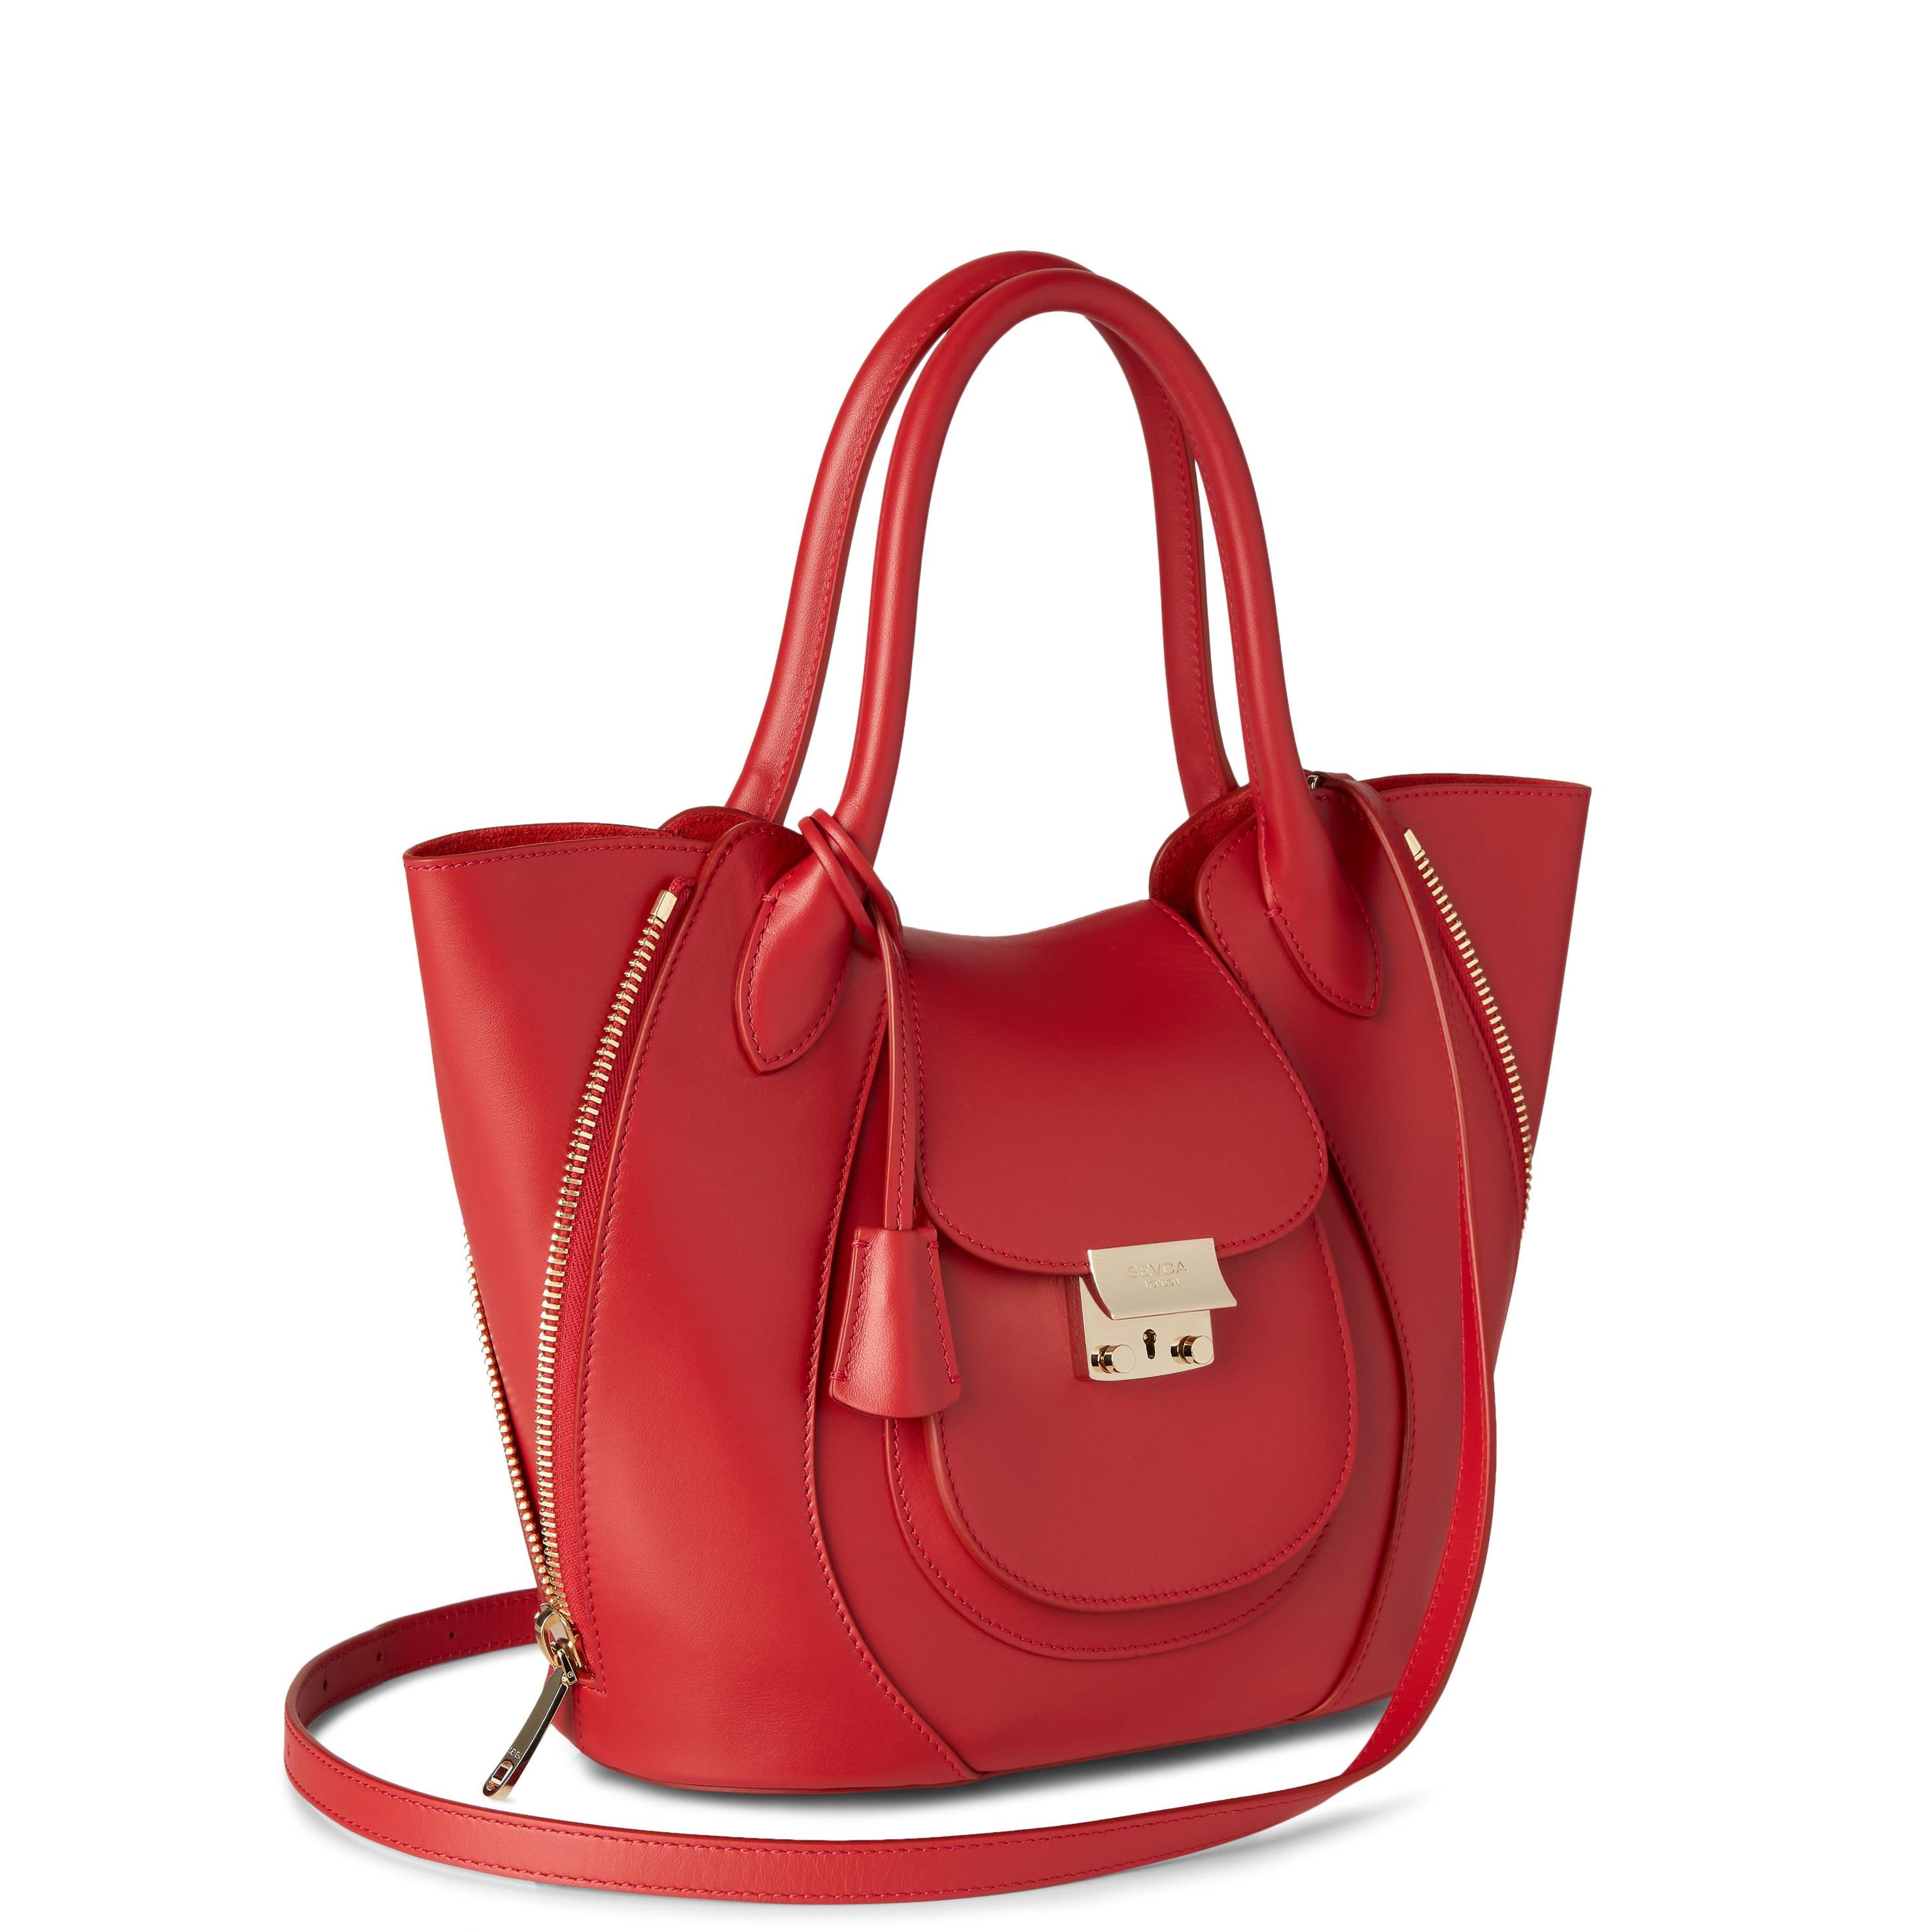 Red Luxury Designer Bag - Fusion of London's style and Italian craftsmanship.